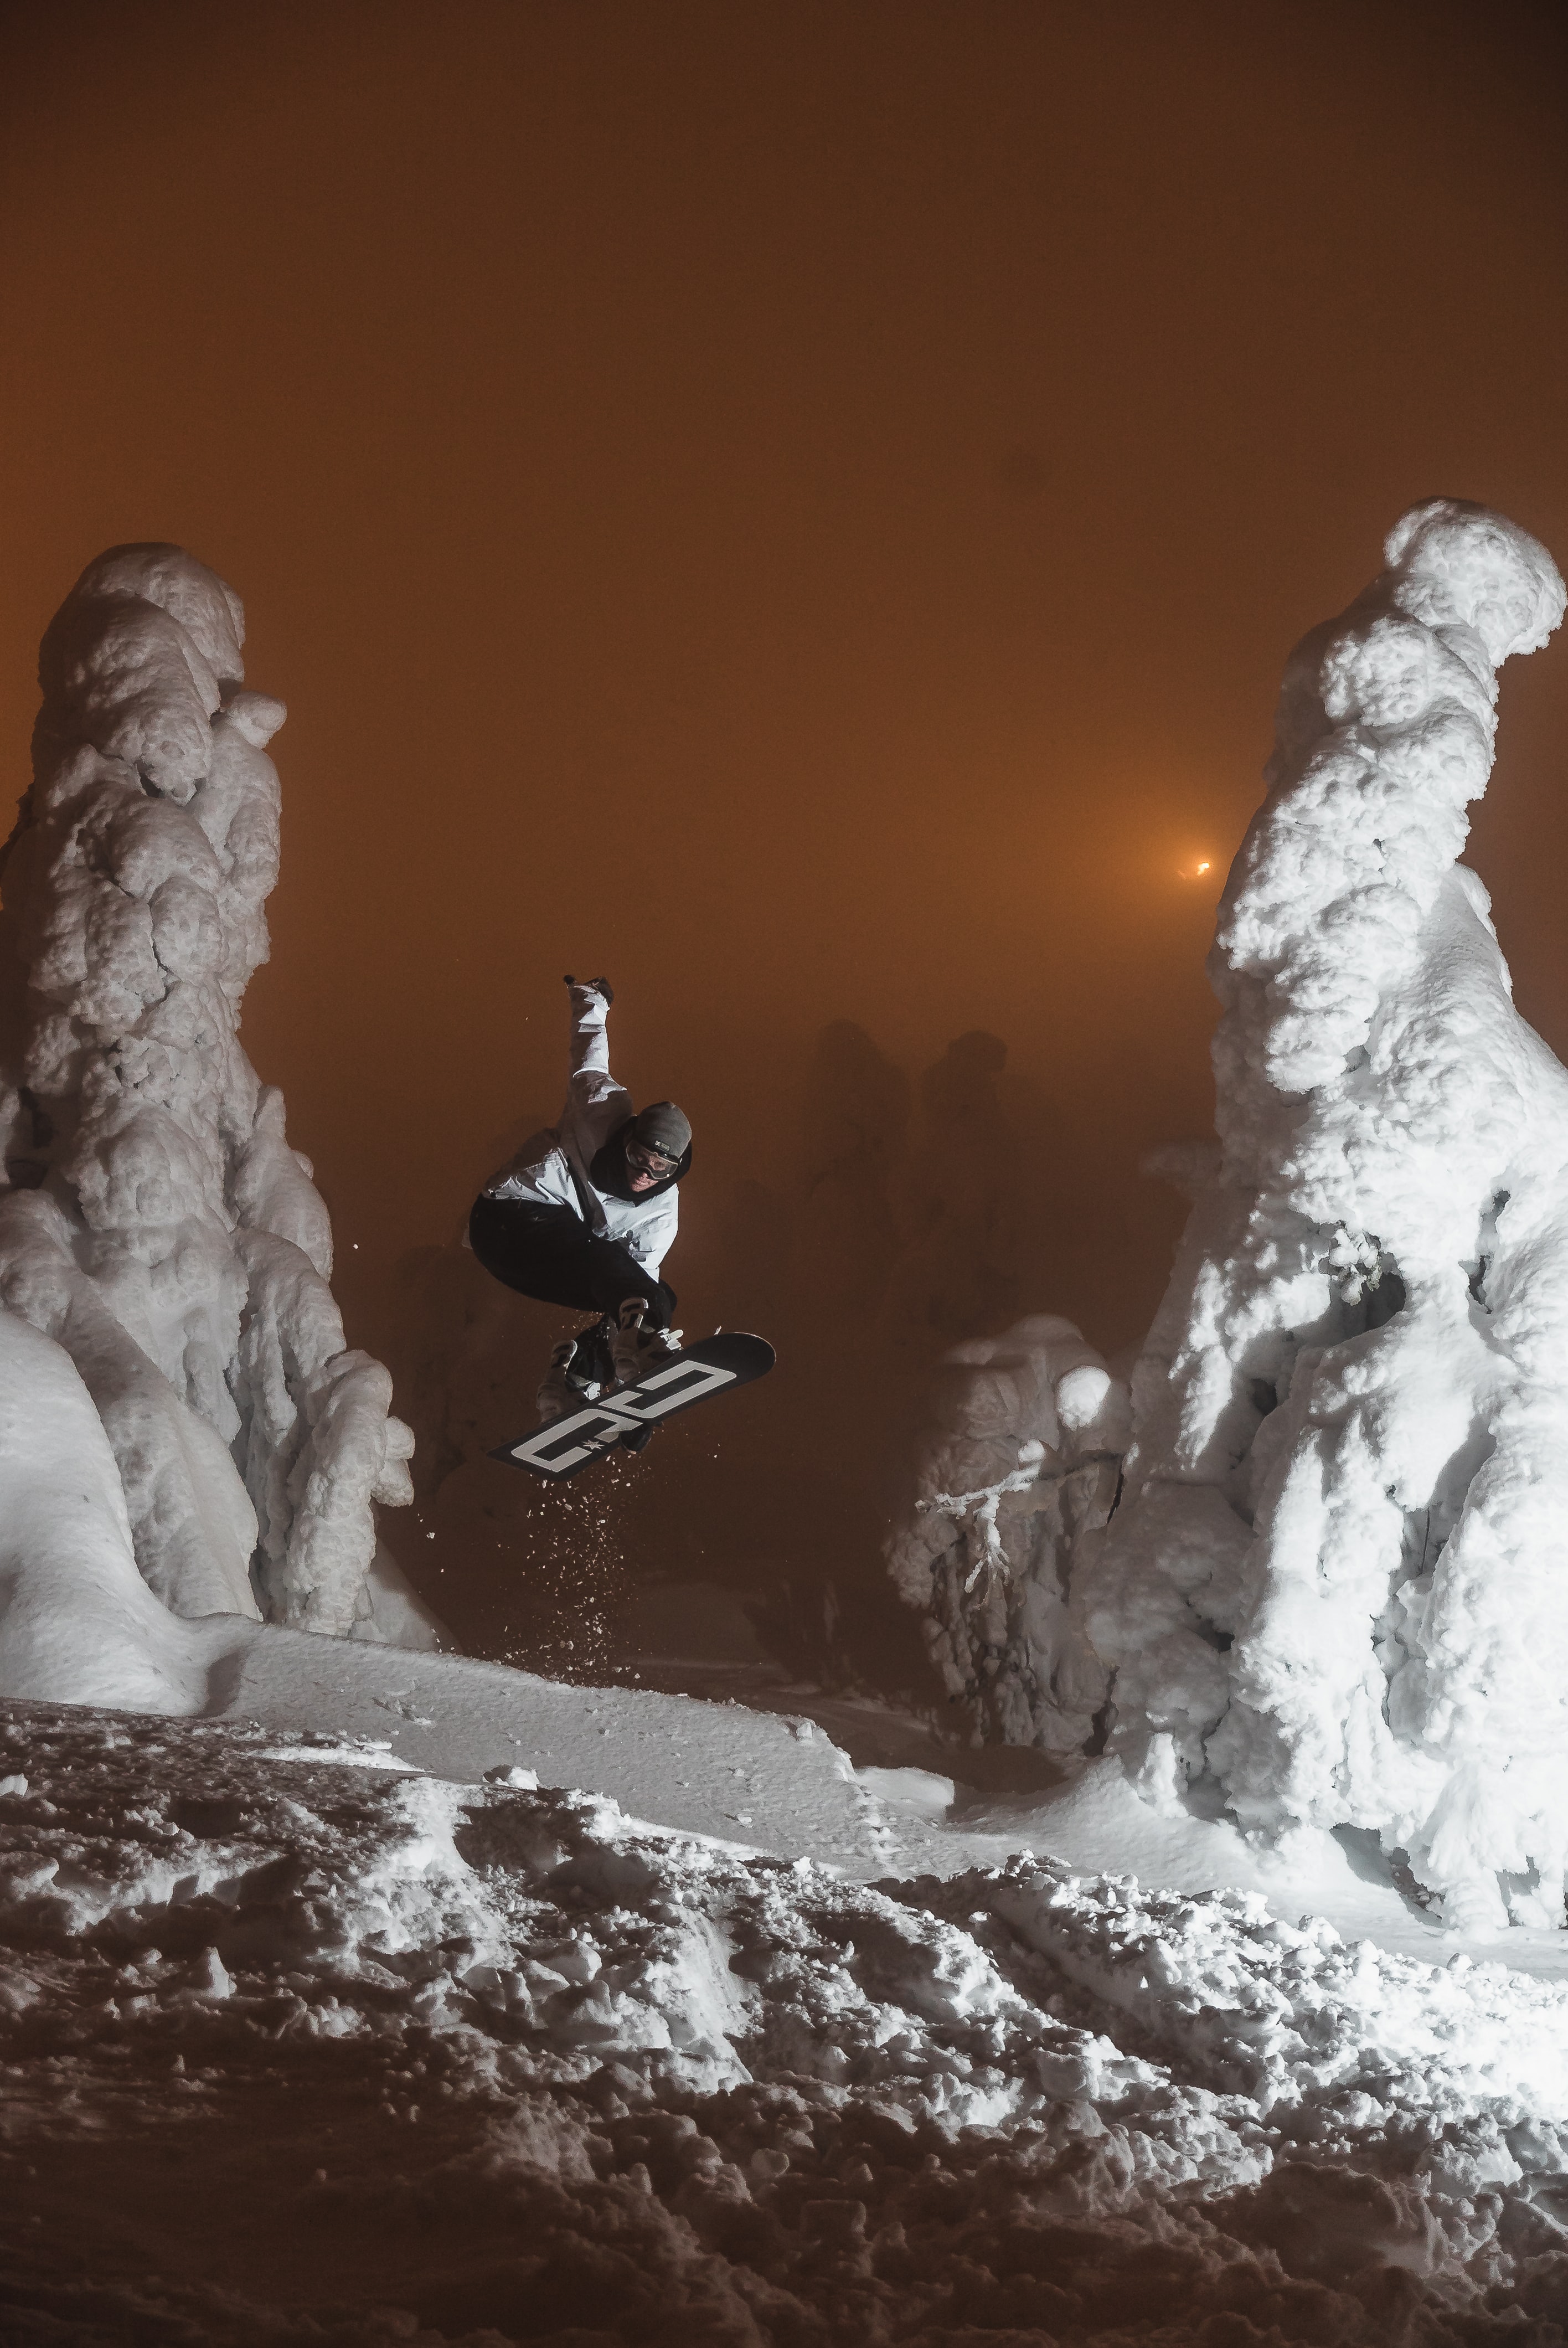 jump, sports, snow, human, person, bounce, snowboard, snowboarder